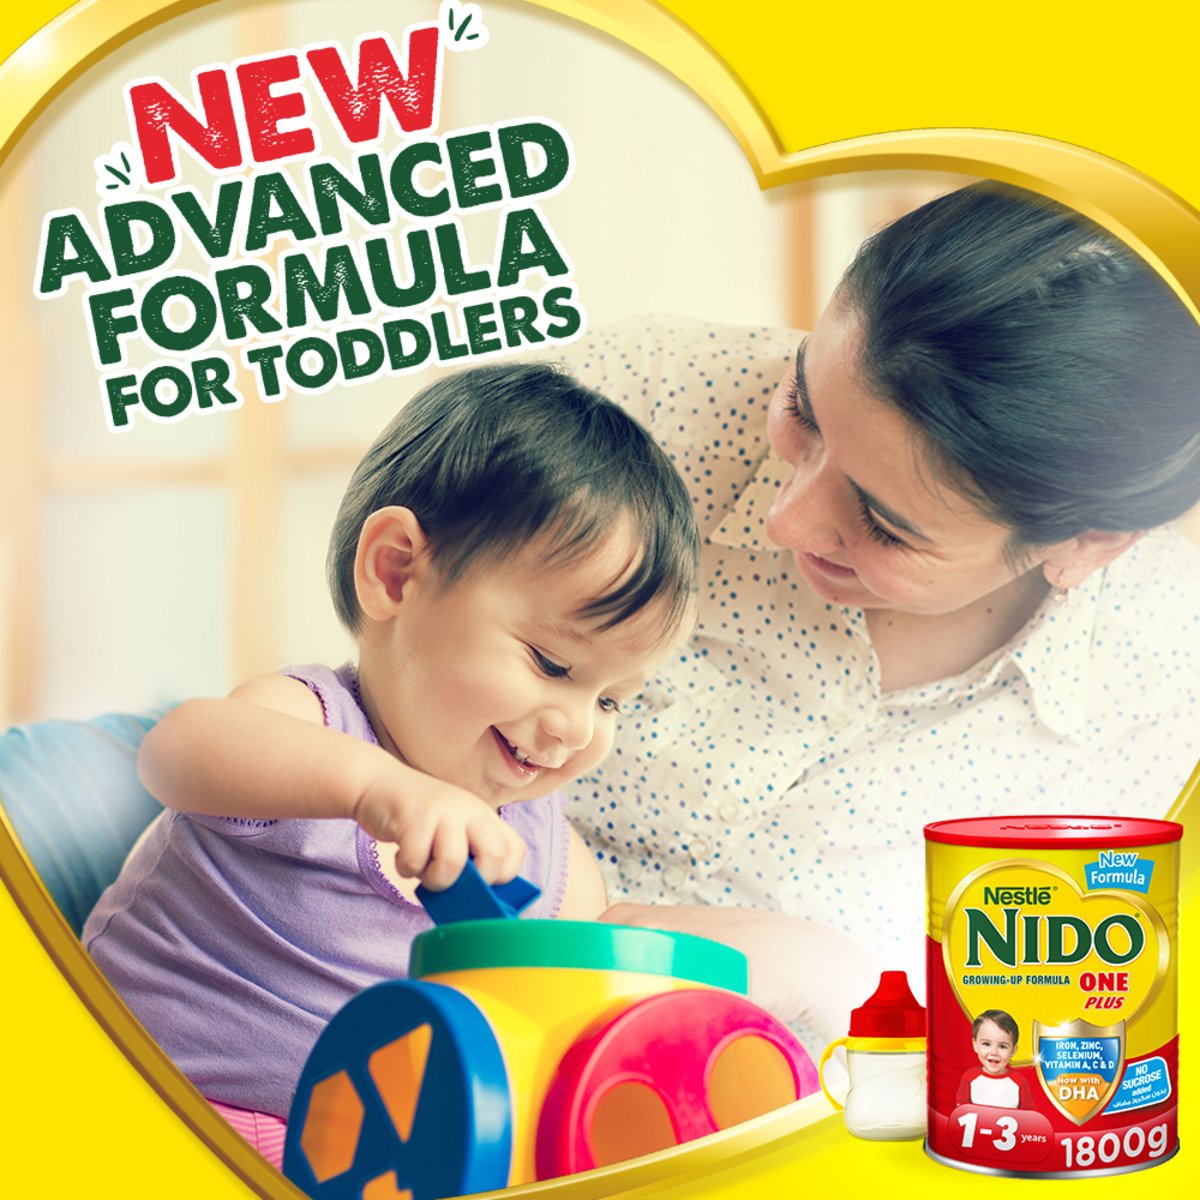 Nestle Nido One Plus Growing Up Formula for Toddlers From 1-3 years 1.8 kg